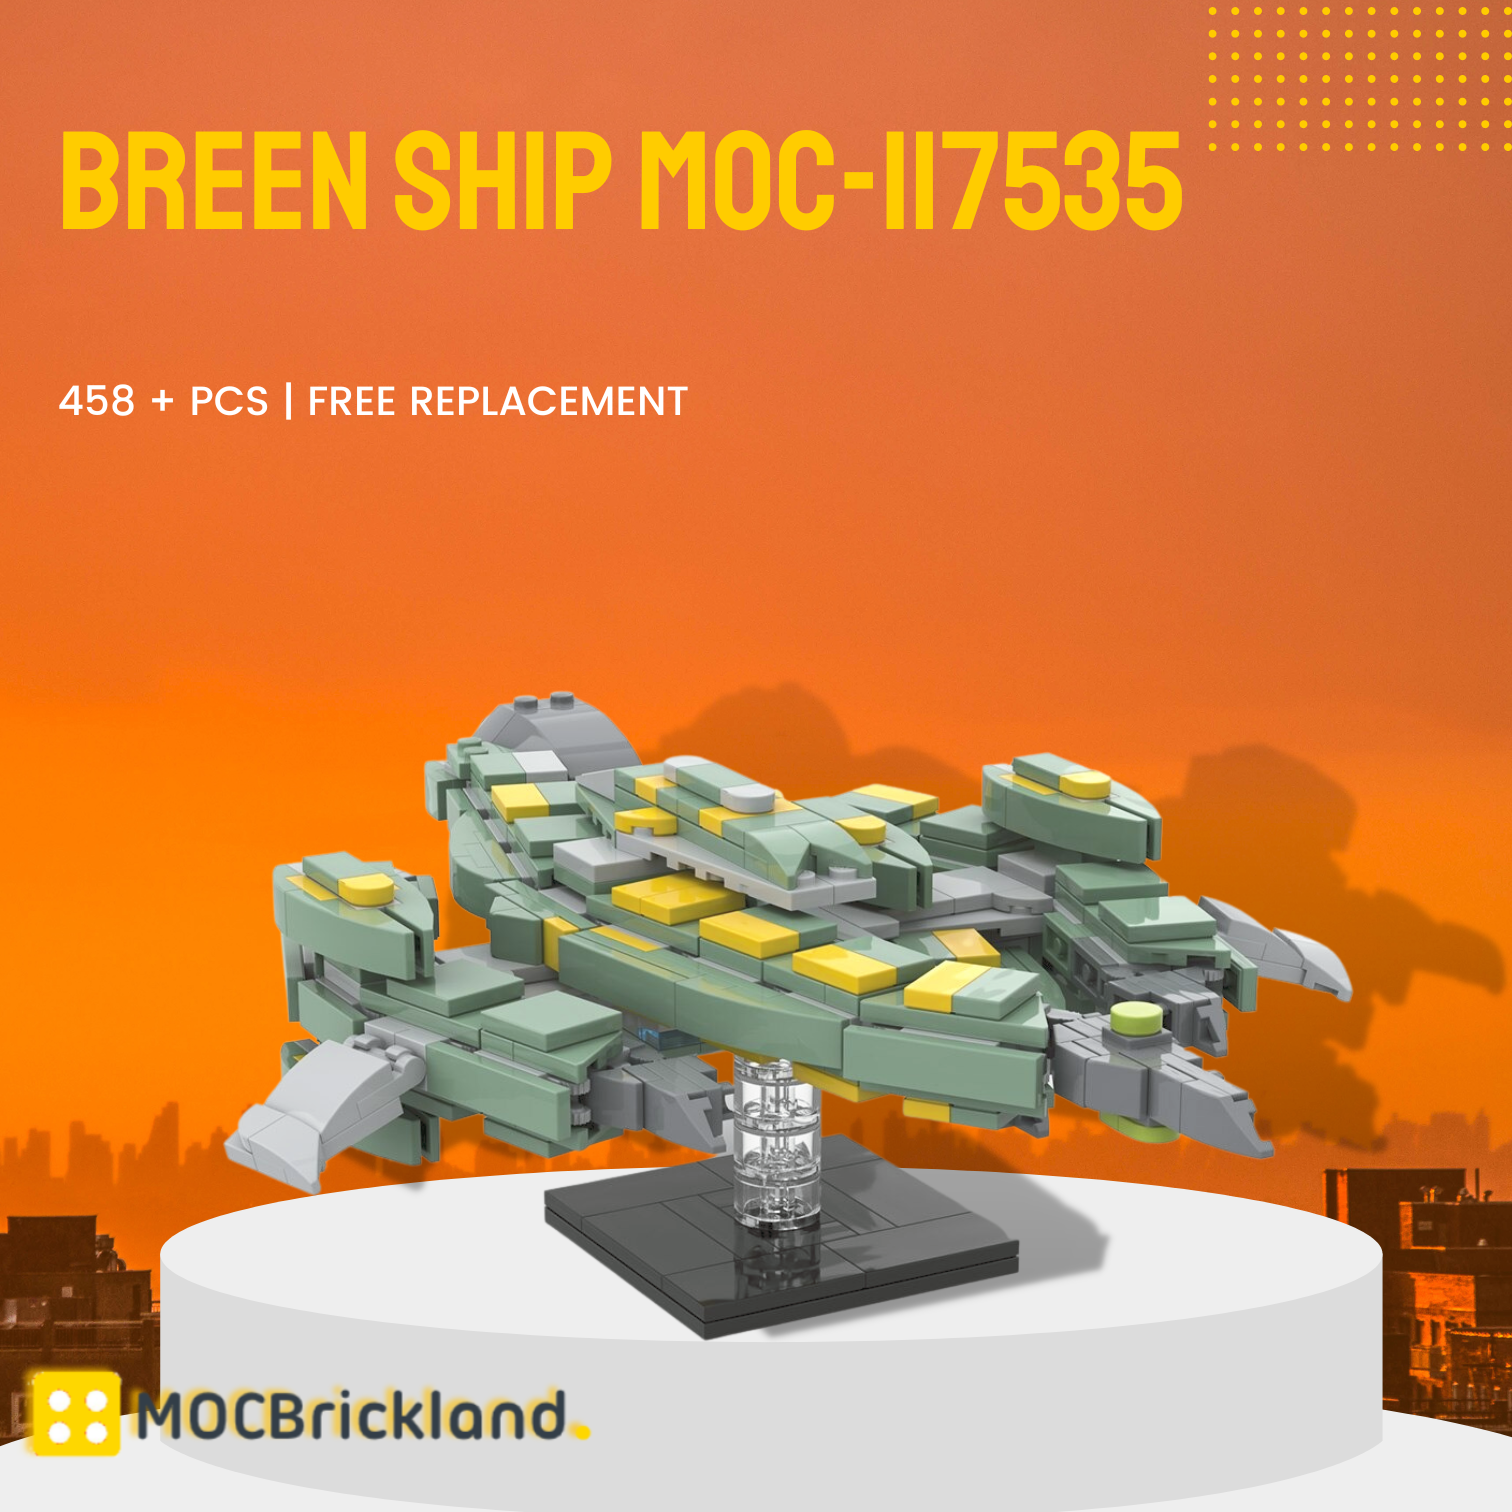 Breen Ship MOC-117535 Space With 458 Pieces